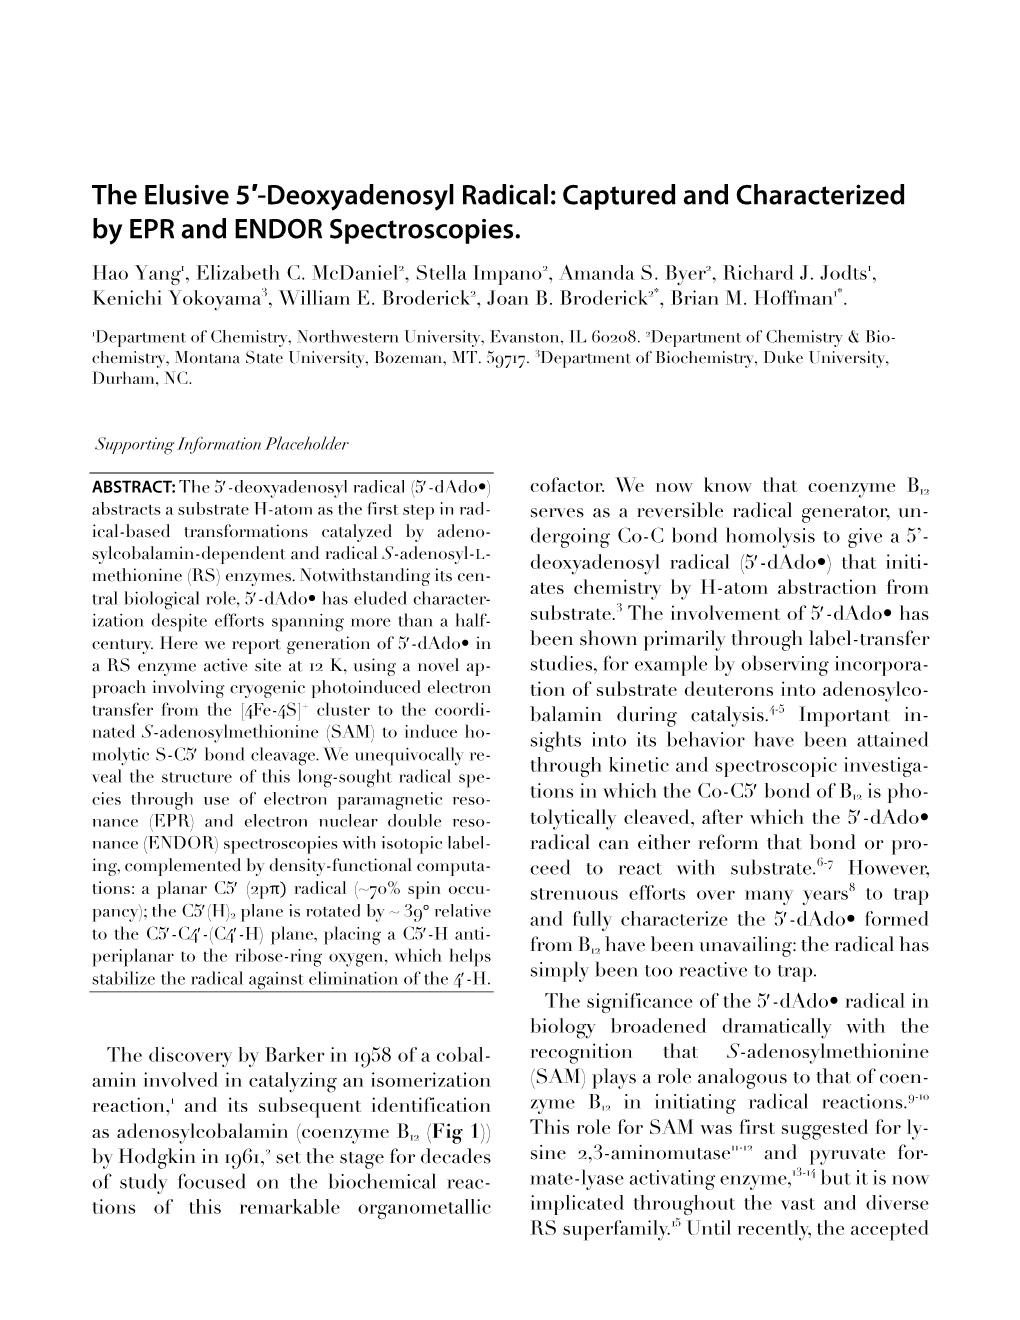 The Elusive 5′-Deoxyadenosyl Radical: Captured and Characterized by EPR and ENDOR Spectroscopies